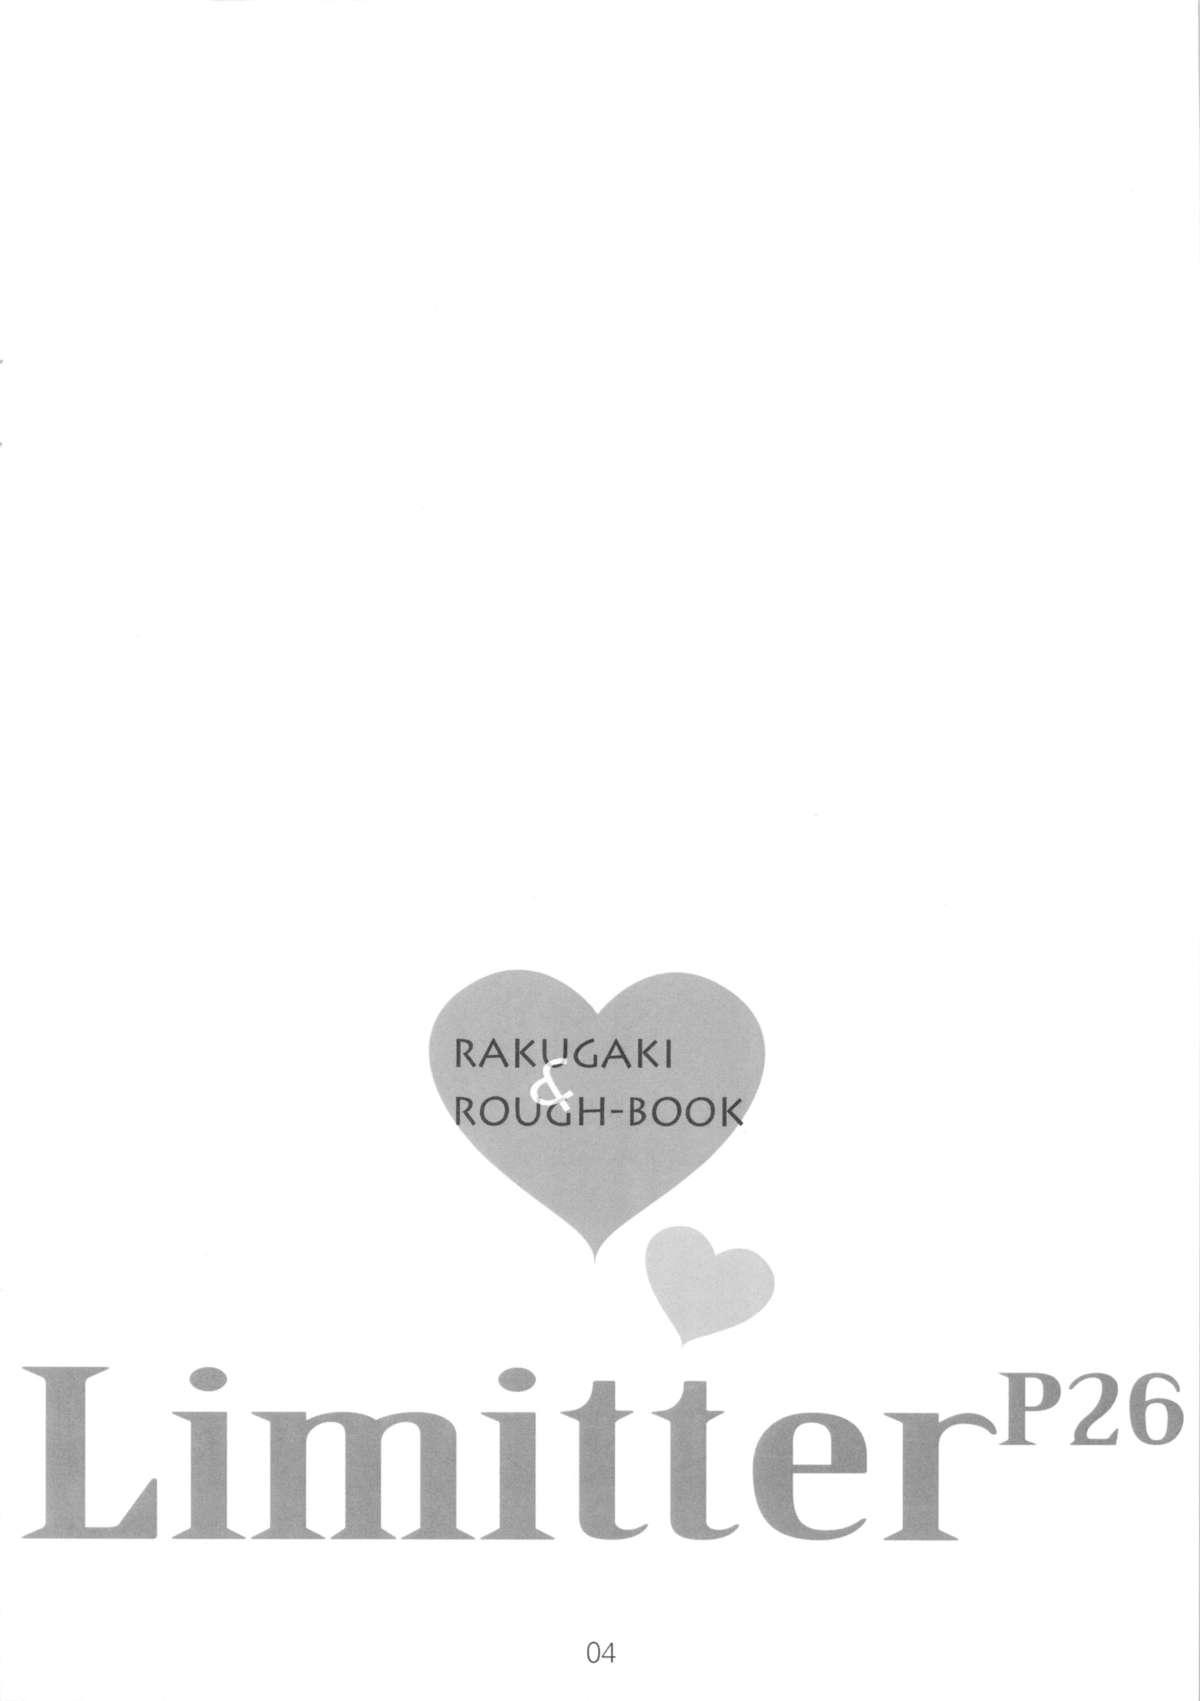 Home Limitter P26 Italiana - Page 4